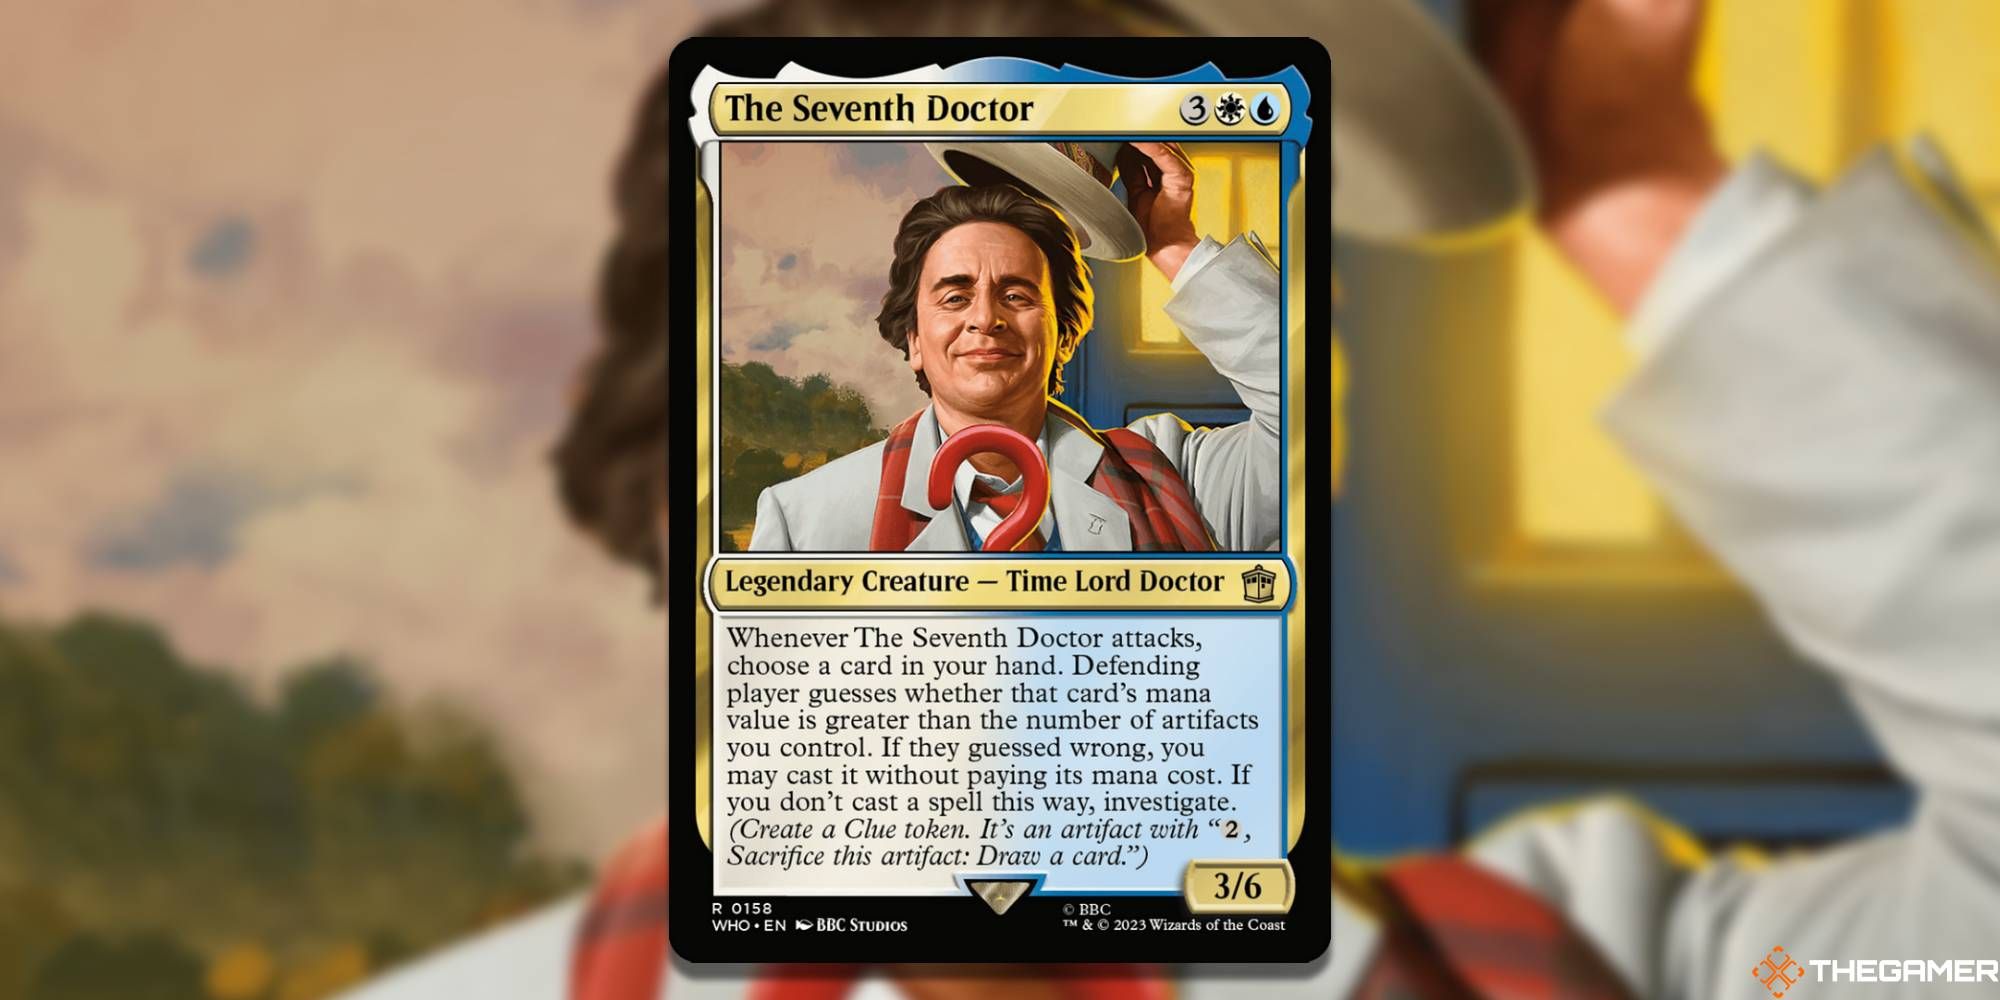 The Seventh Doctor by BBC Studios